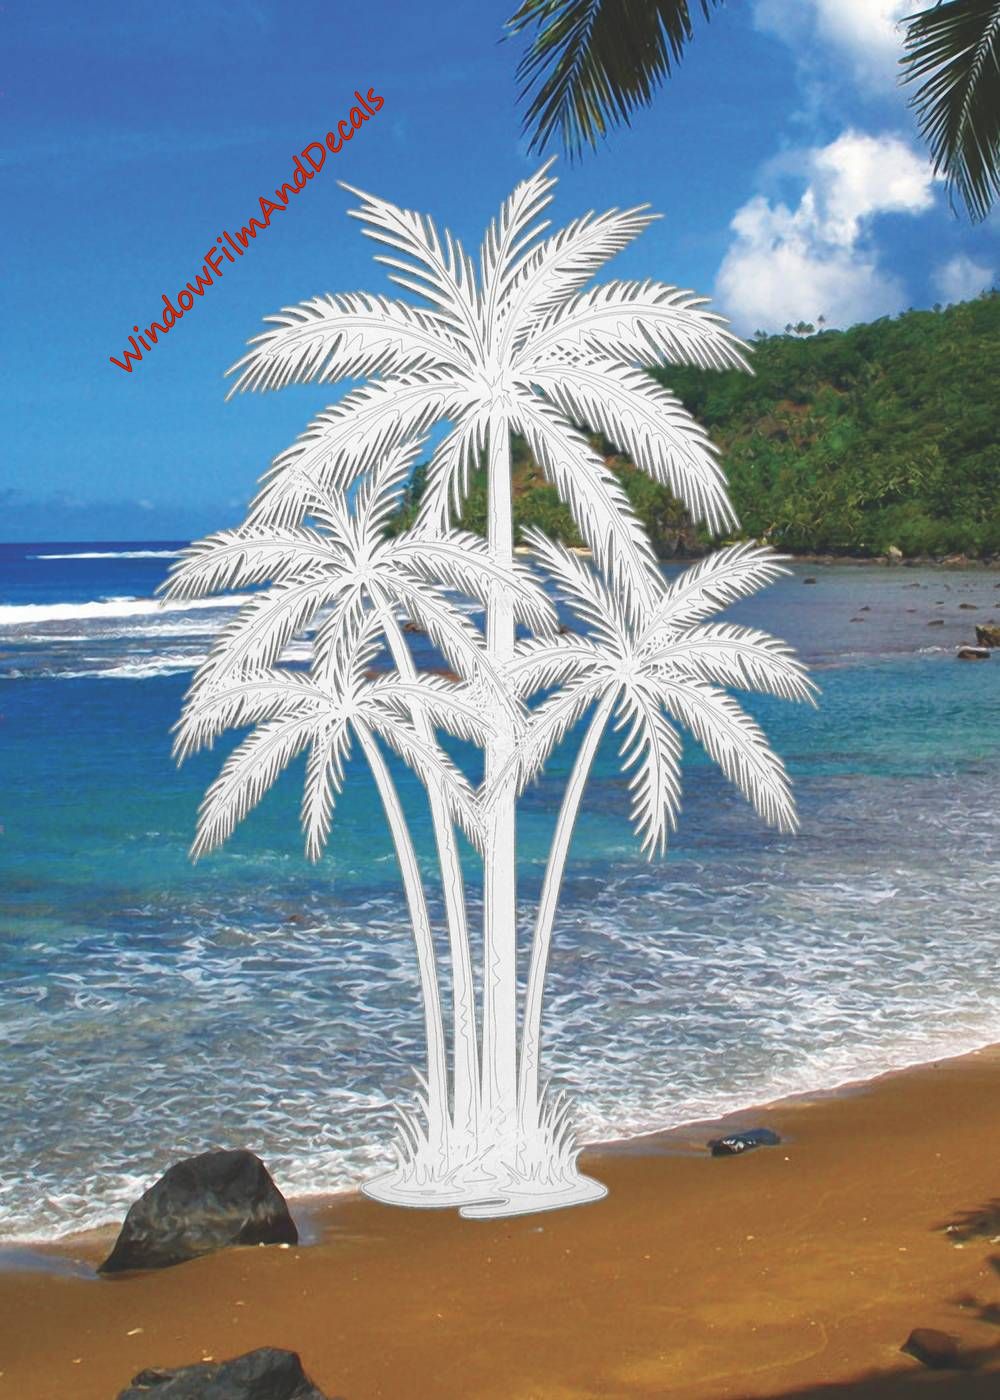 Palm Trees Center Oval Static Cling Window Decal - Clear w/White Palm Design